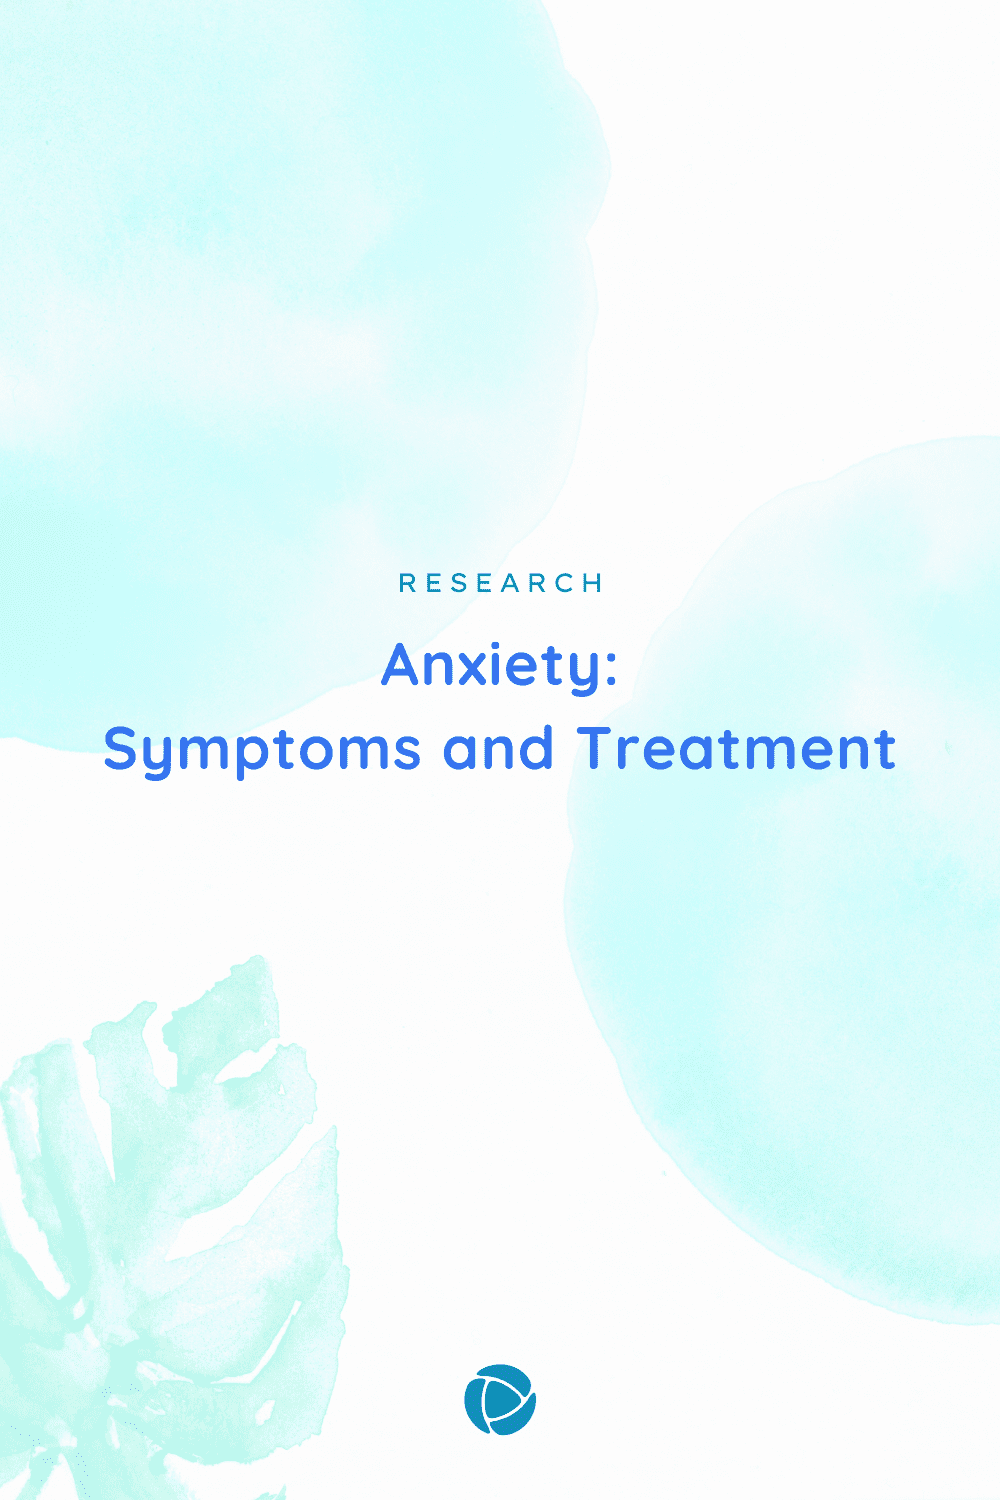 Symptoms of Anxiety and Treatment